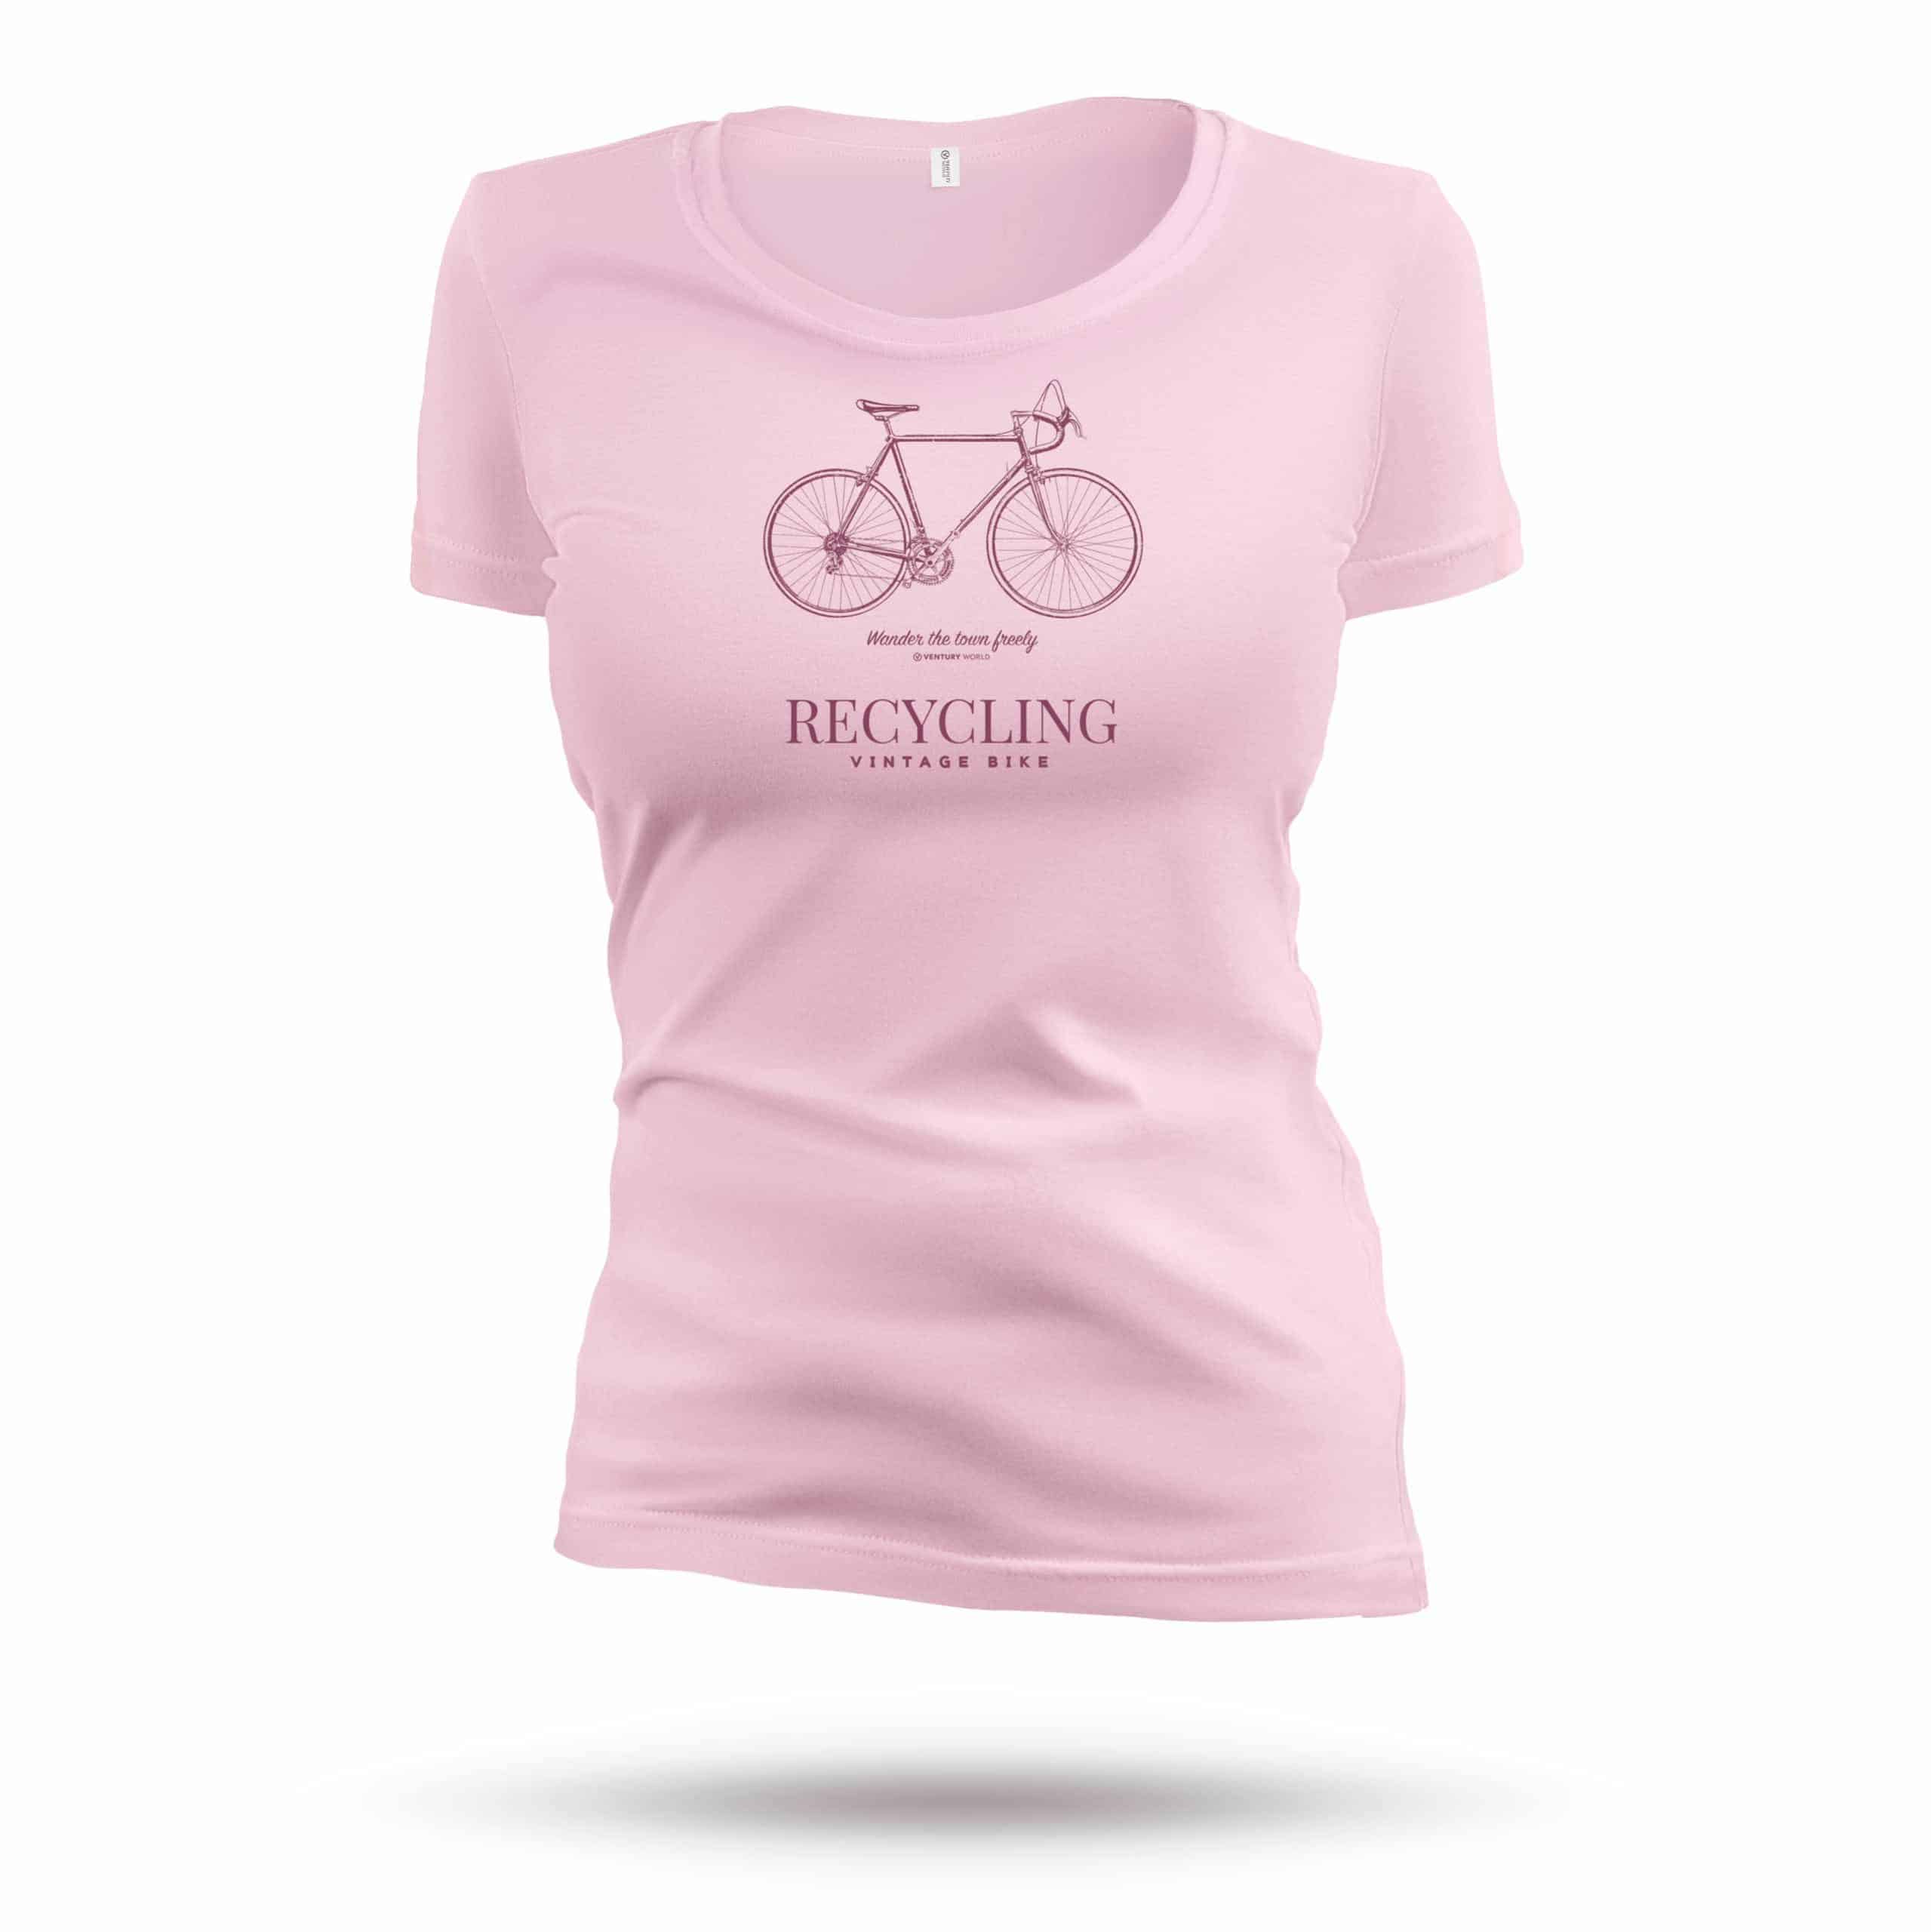 T-shirt-cycling - Vintage race Bike - Wander the town freely - Ventury World - Collection live freely femme 100% naturel coupe ajustée grand col rond.